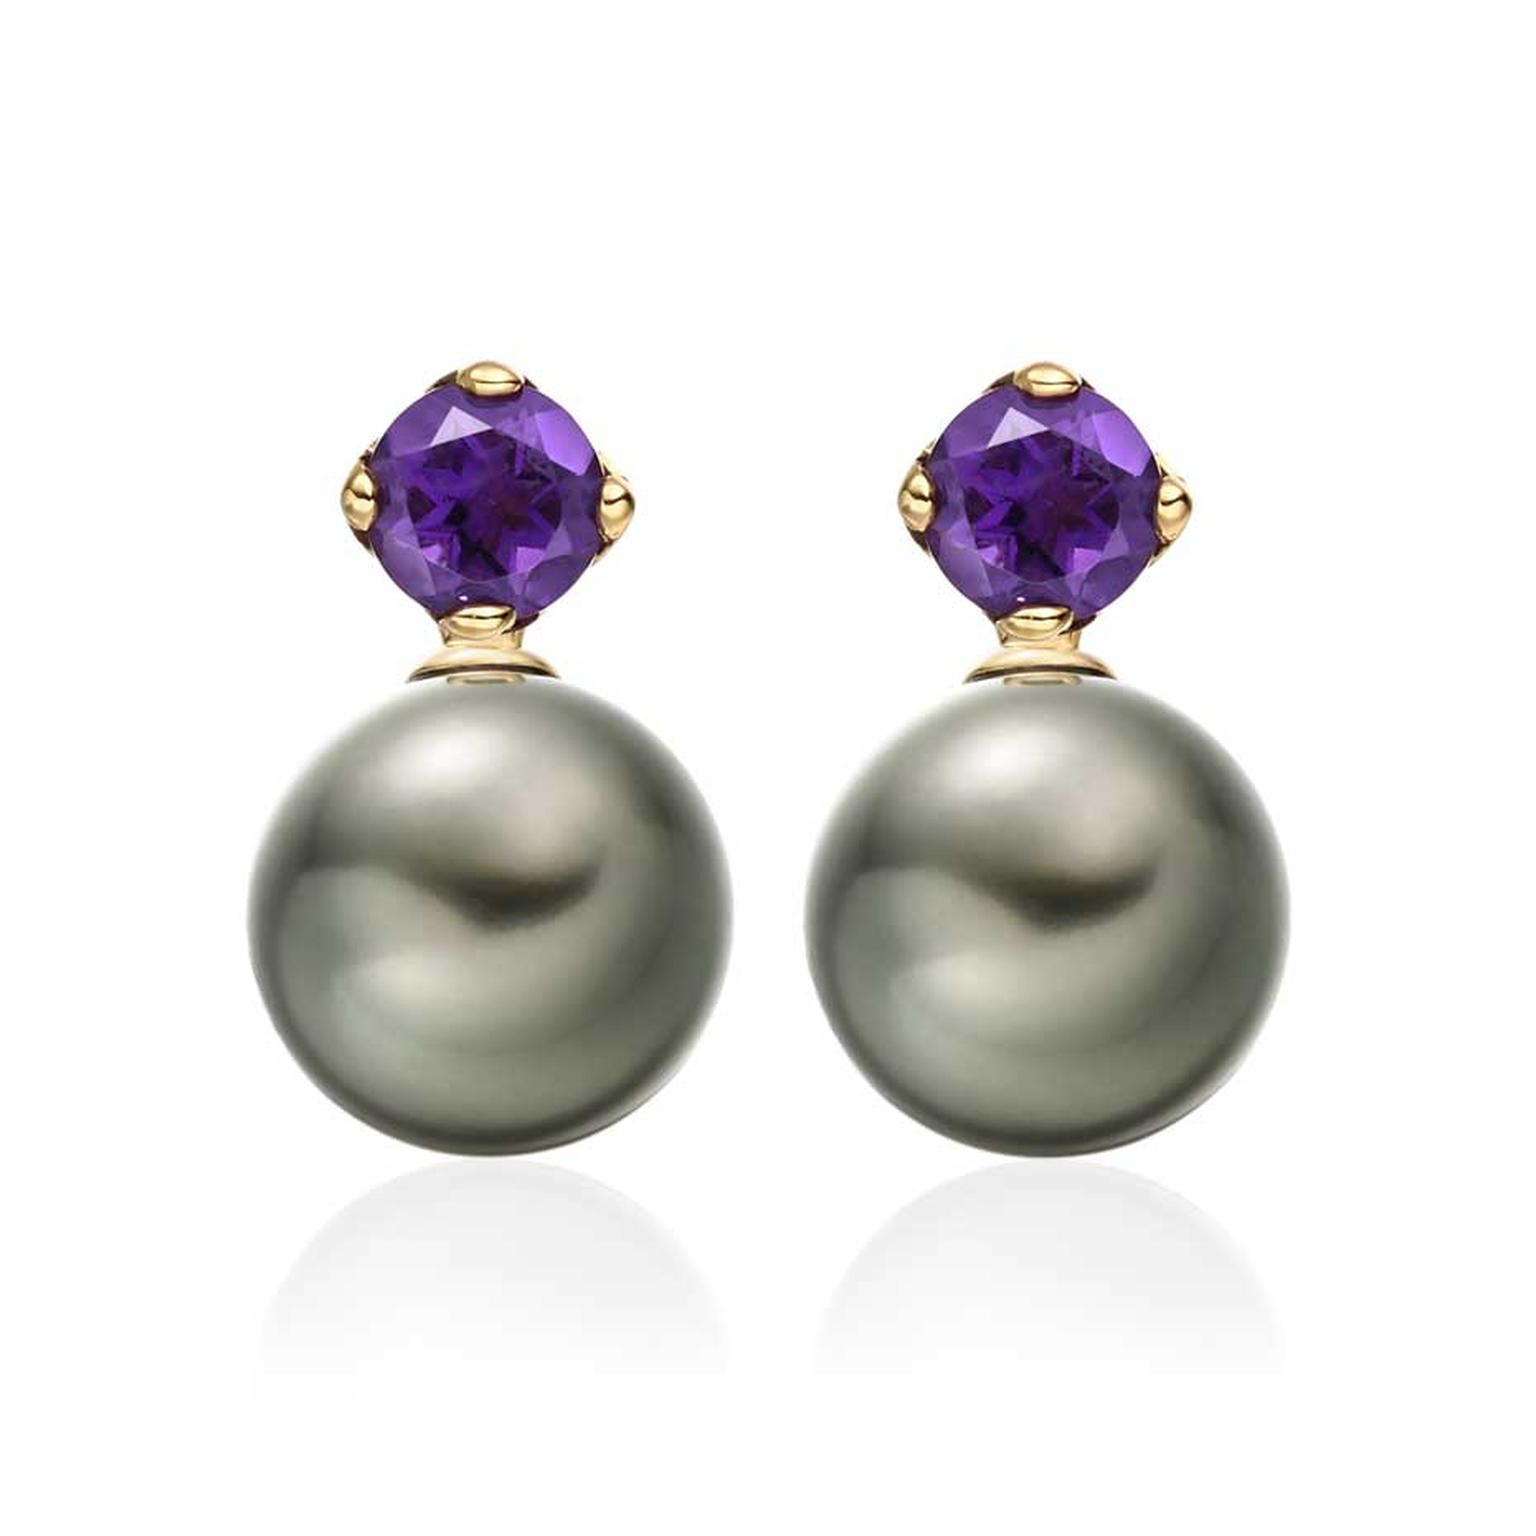 Winterson Lief Tahitian pearl earrings in yellow gold with amethysts.